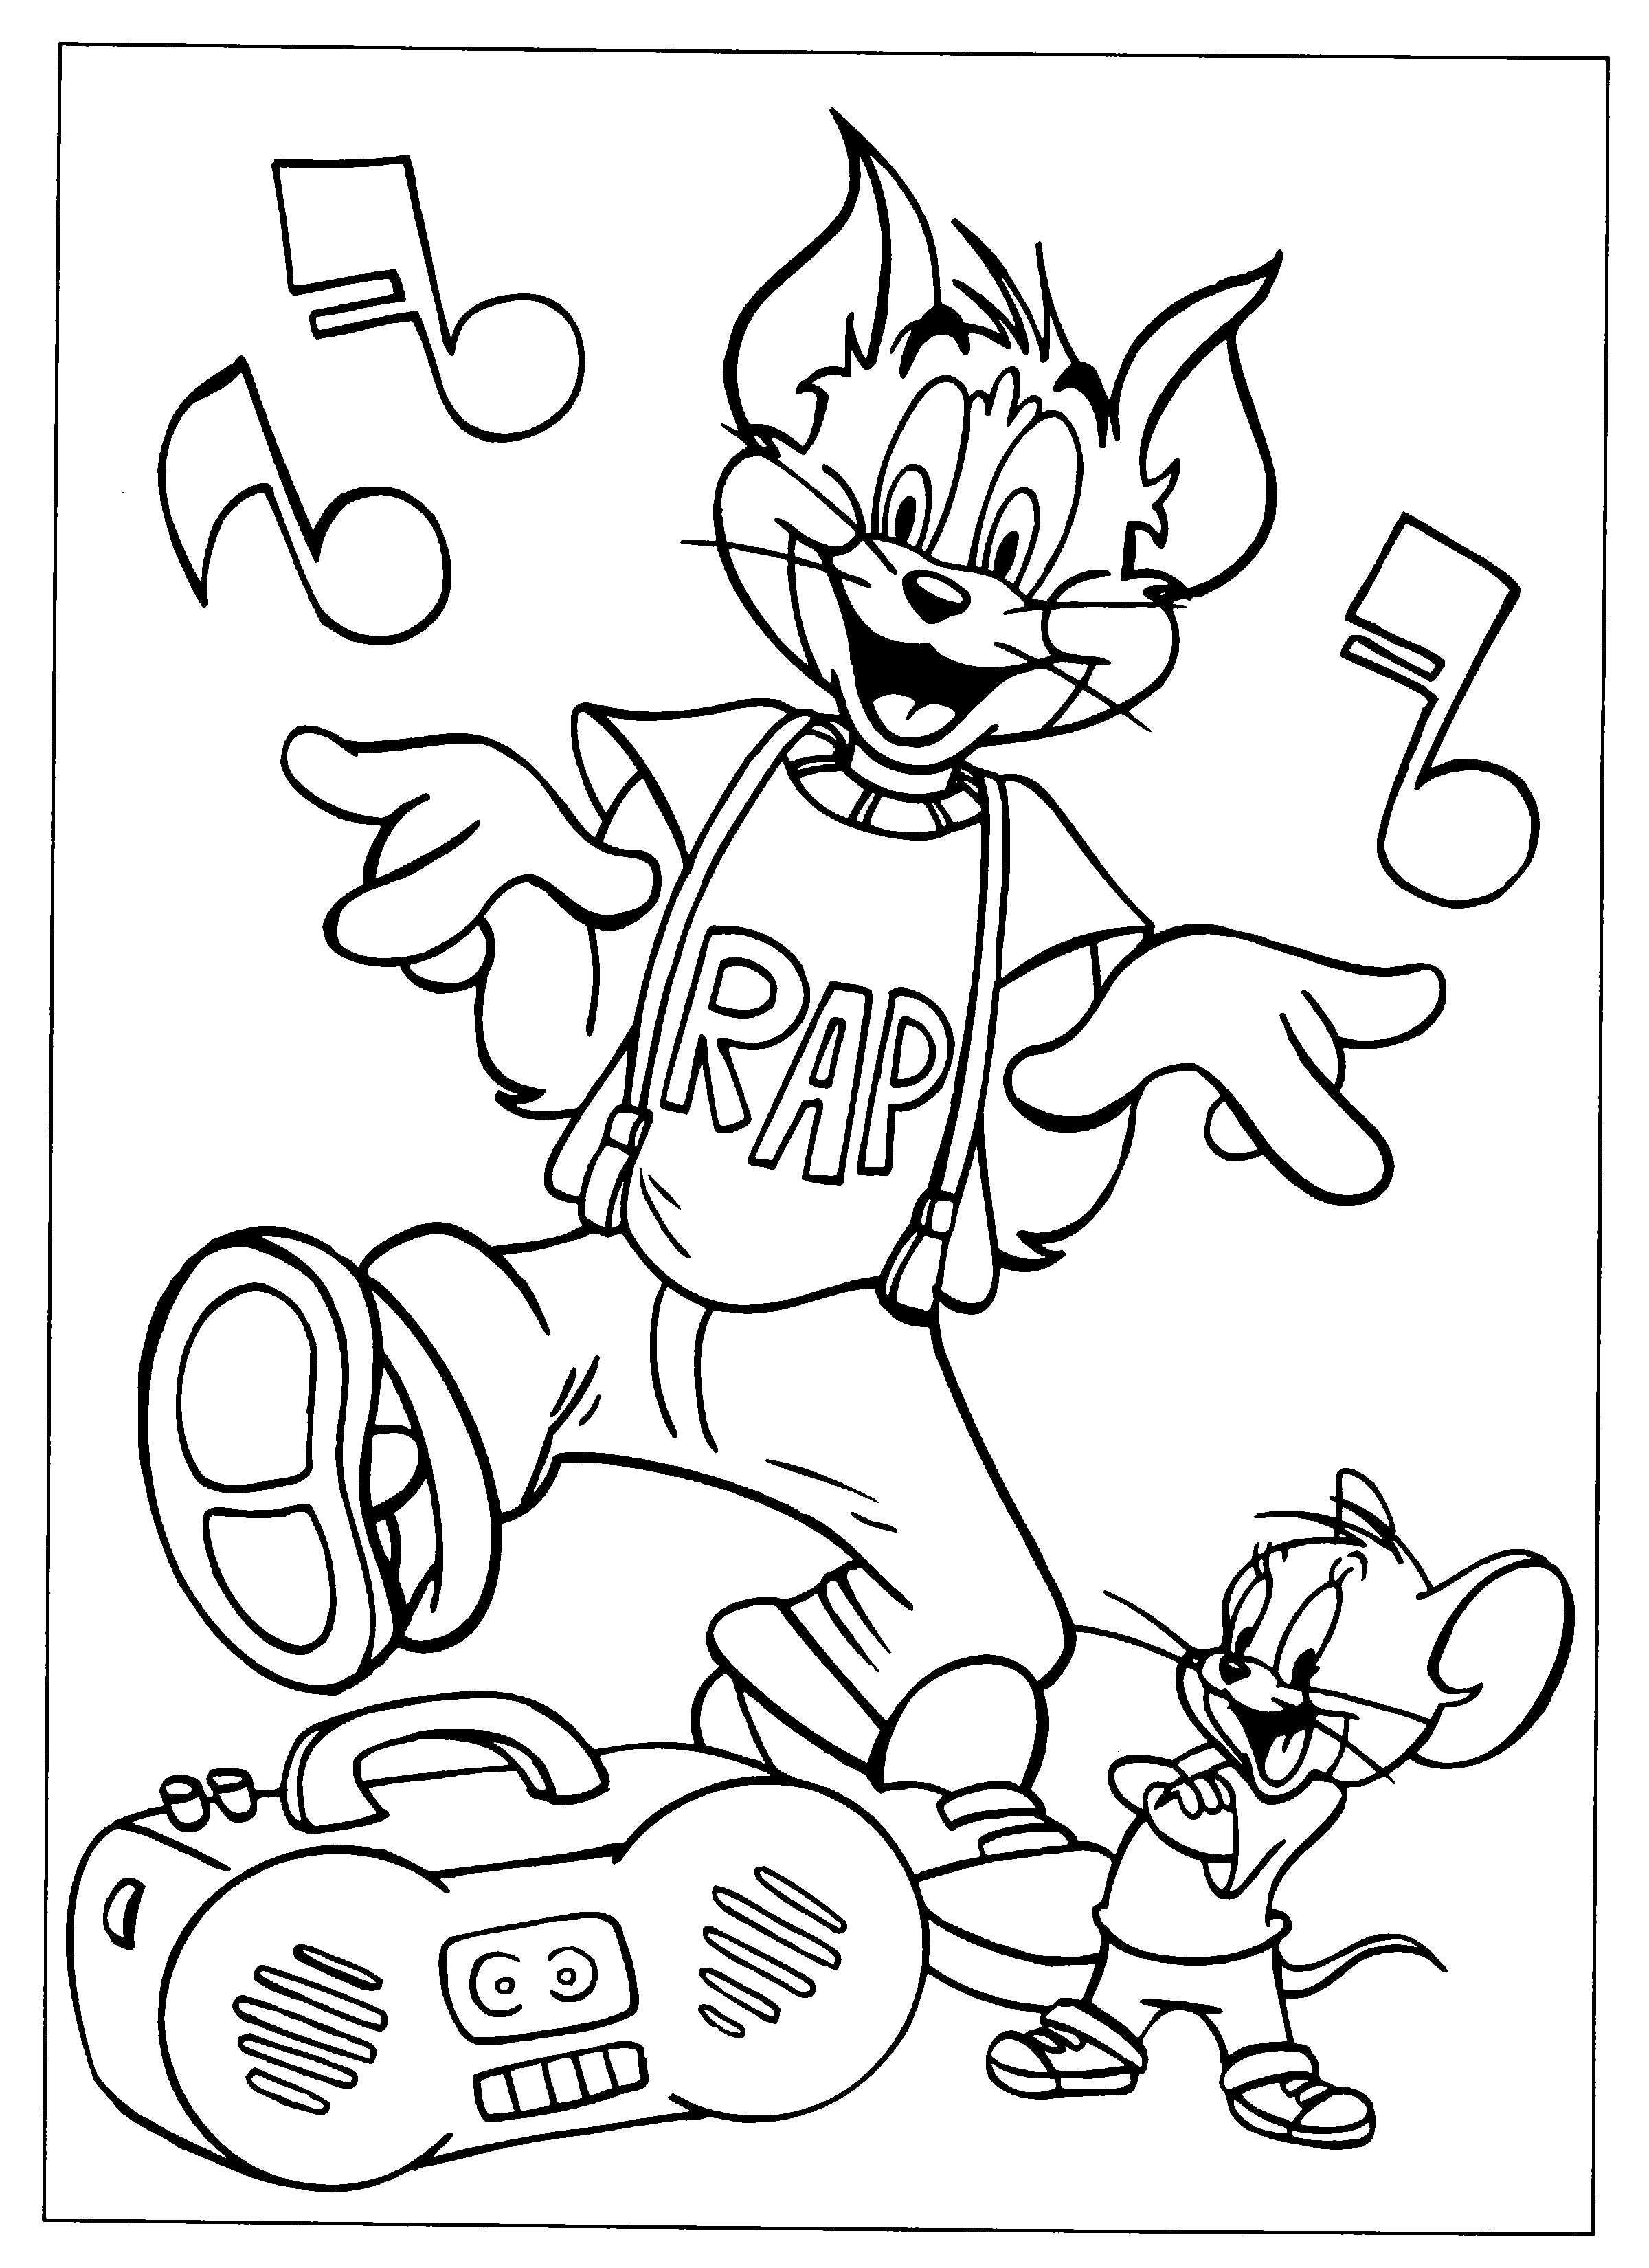 tom and jerry coloring pages online free printable tom and jerry coloring pages for kids jerry online tom and coloring pages 